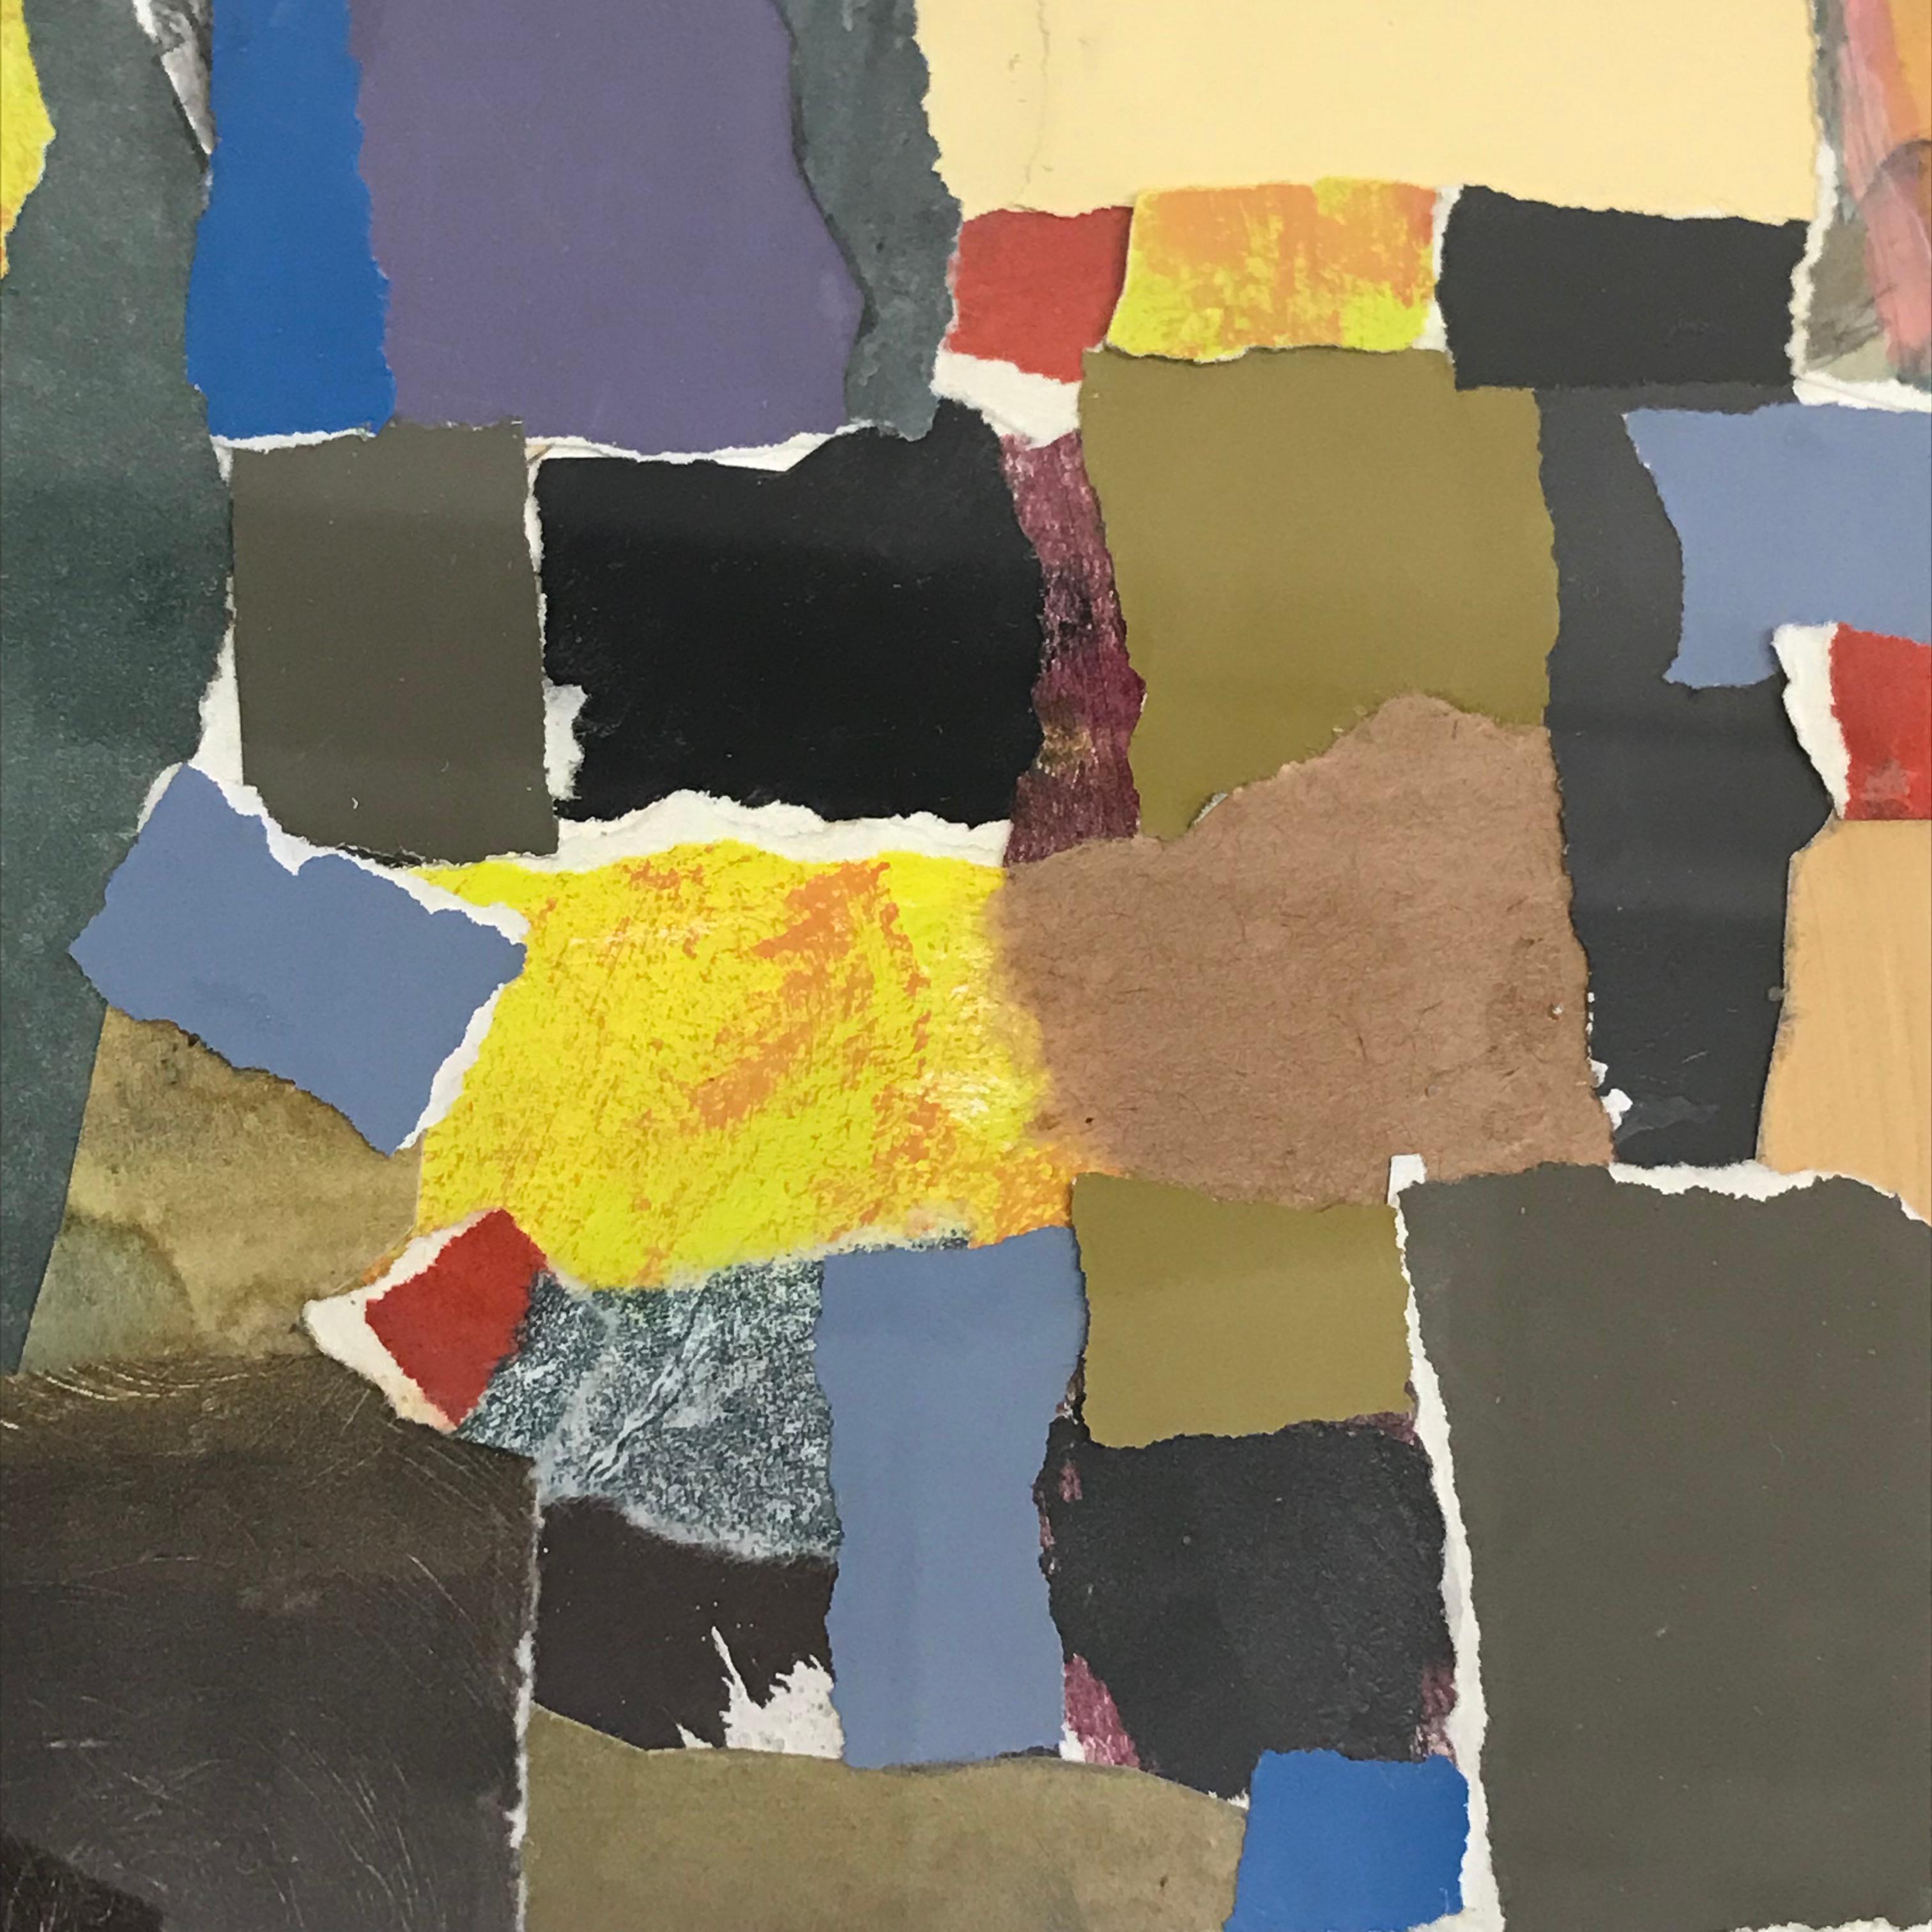 Contemporary abstract mixed-media collage by American artist Sandra Constantine
Matted in a black wood frame
The artist, born in 1971, lives, works and has exhibited in New York City
She focuses on collage, combining the disciplines of watercolor